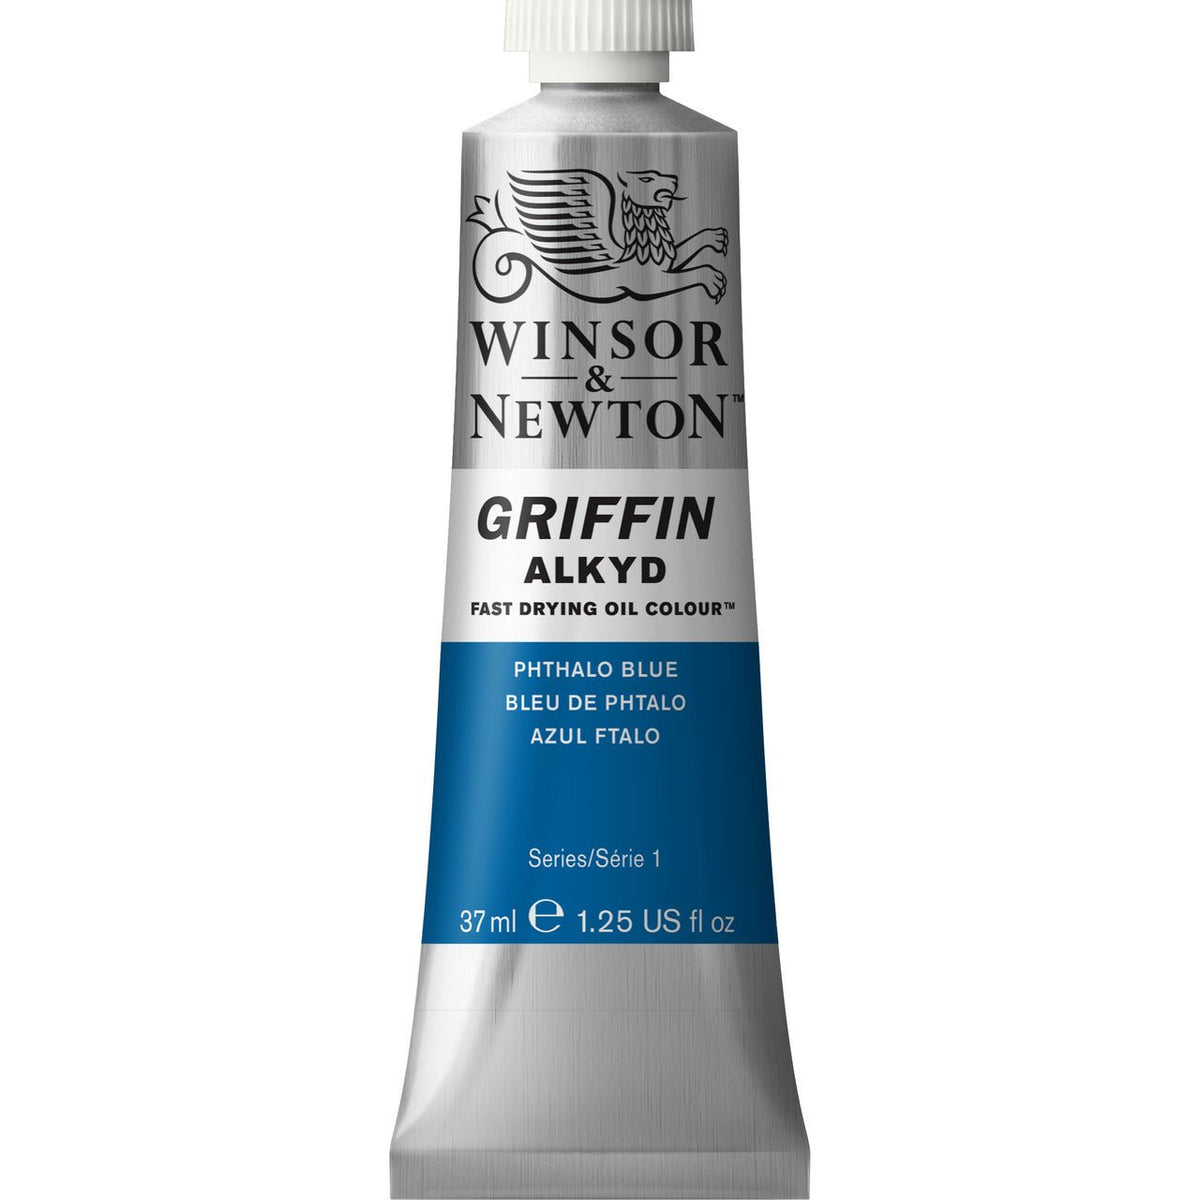 Winsor & Newton Griffin Alkyd 37ml Phthalo Blue - merriartist.com